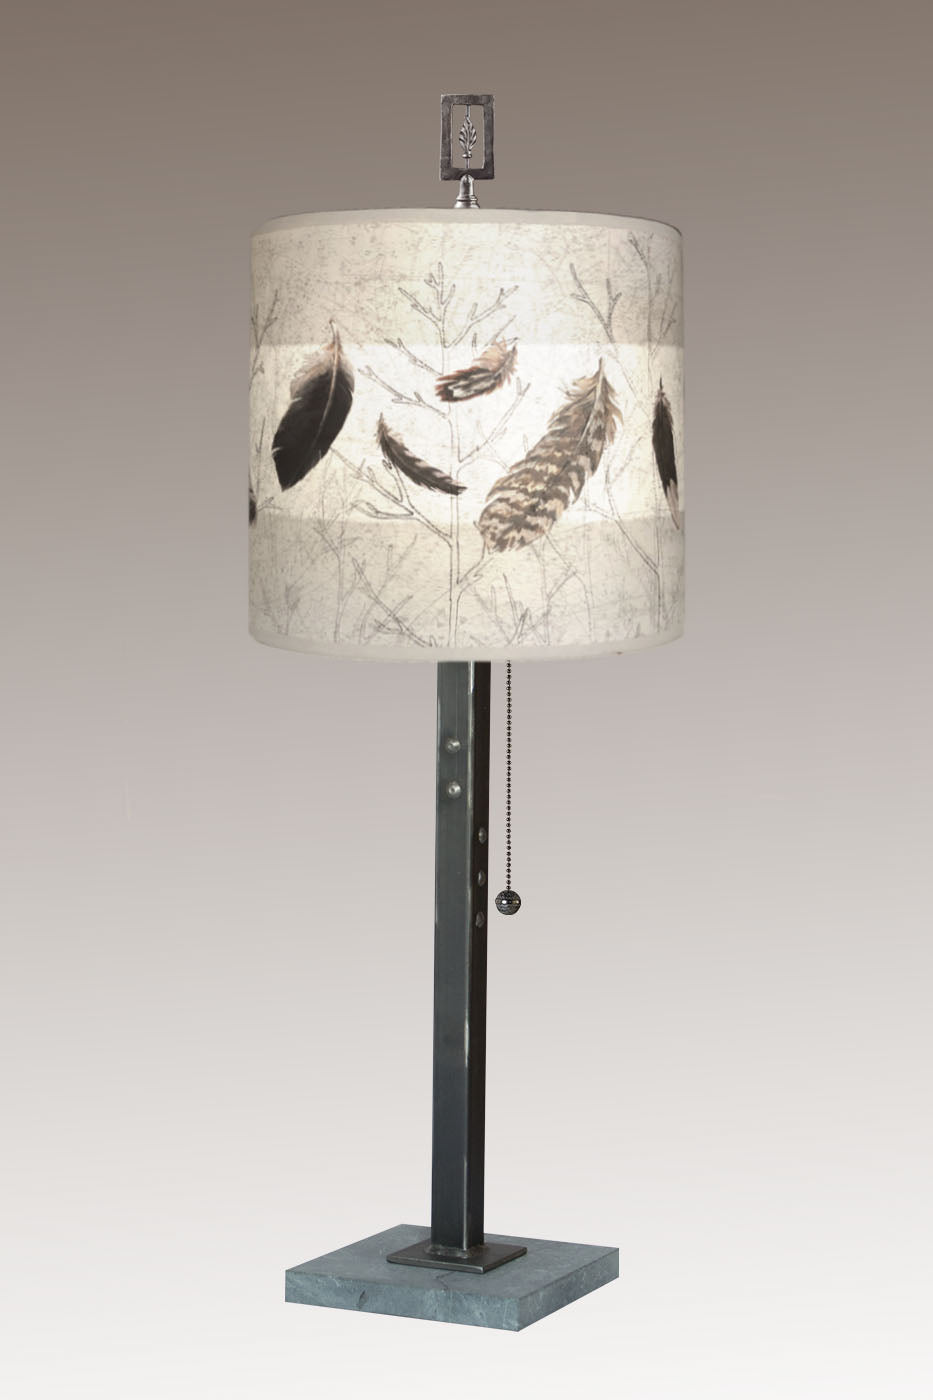 Janna Ugone & Co Table Lamps Steel Table Lamp with Medium Drum Shade in Feathers in Pebble